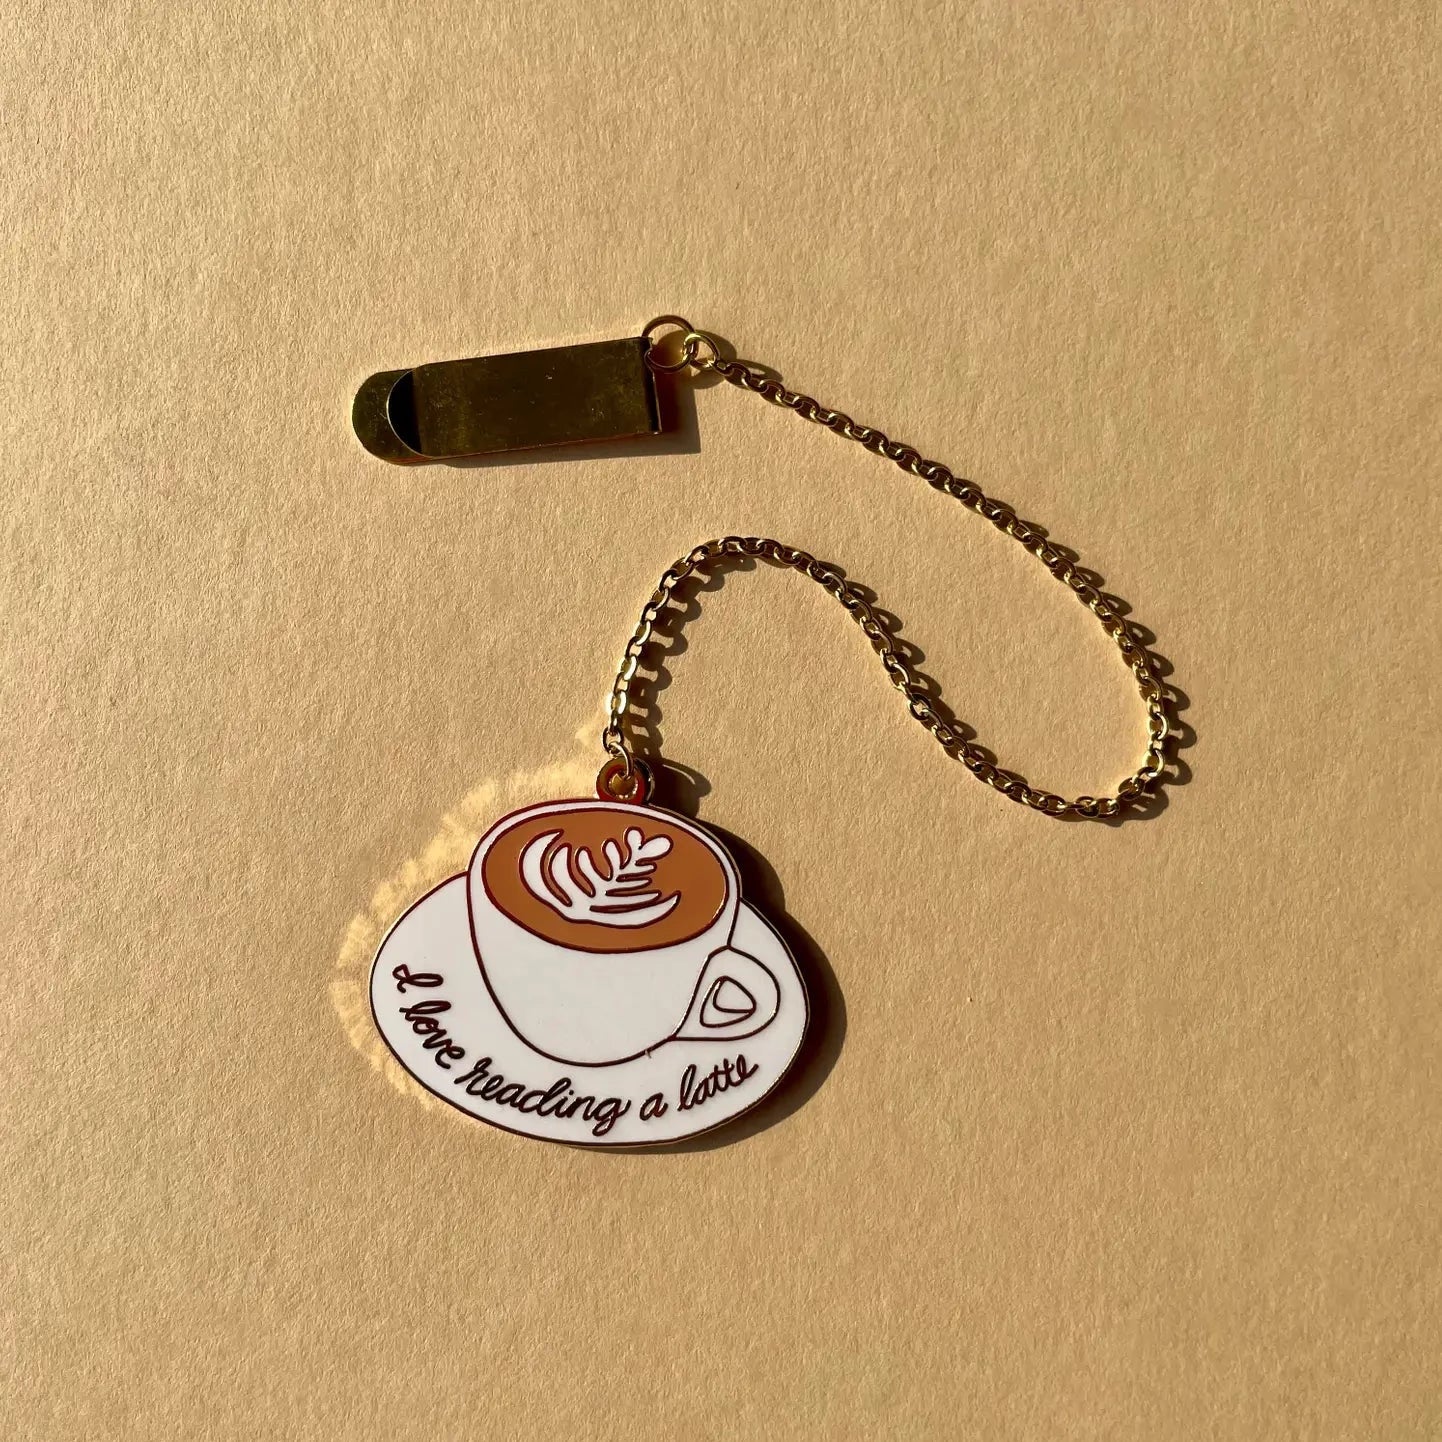 Enamel bookmark with gold chain and clip. Bookmark is a white cup with serving plate, inside the cup is a latter. Across the plate in gold text is printed "I Love reading a latte"